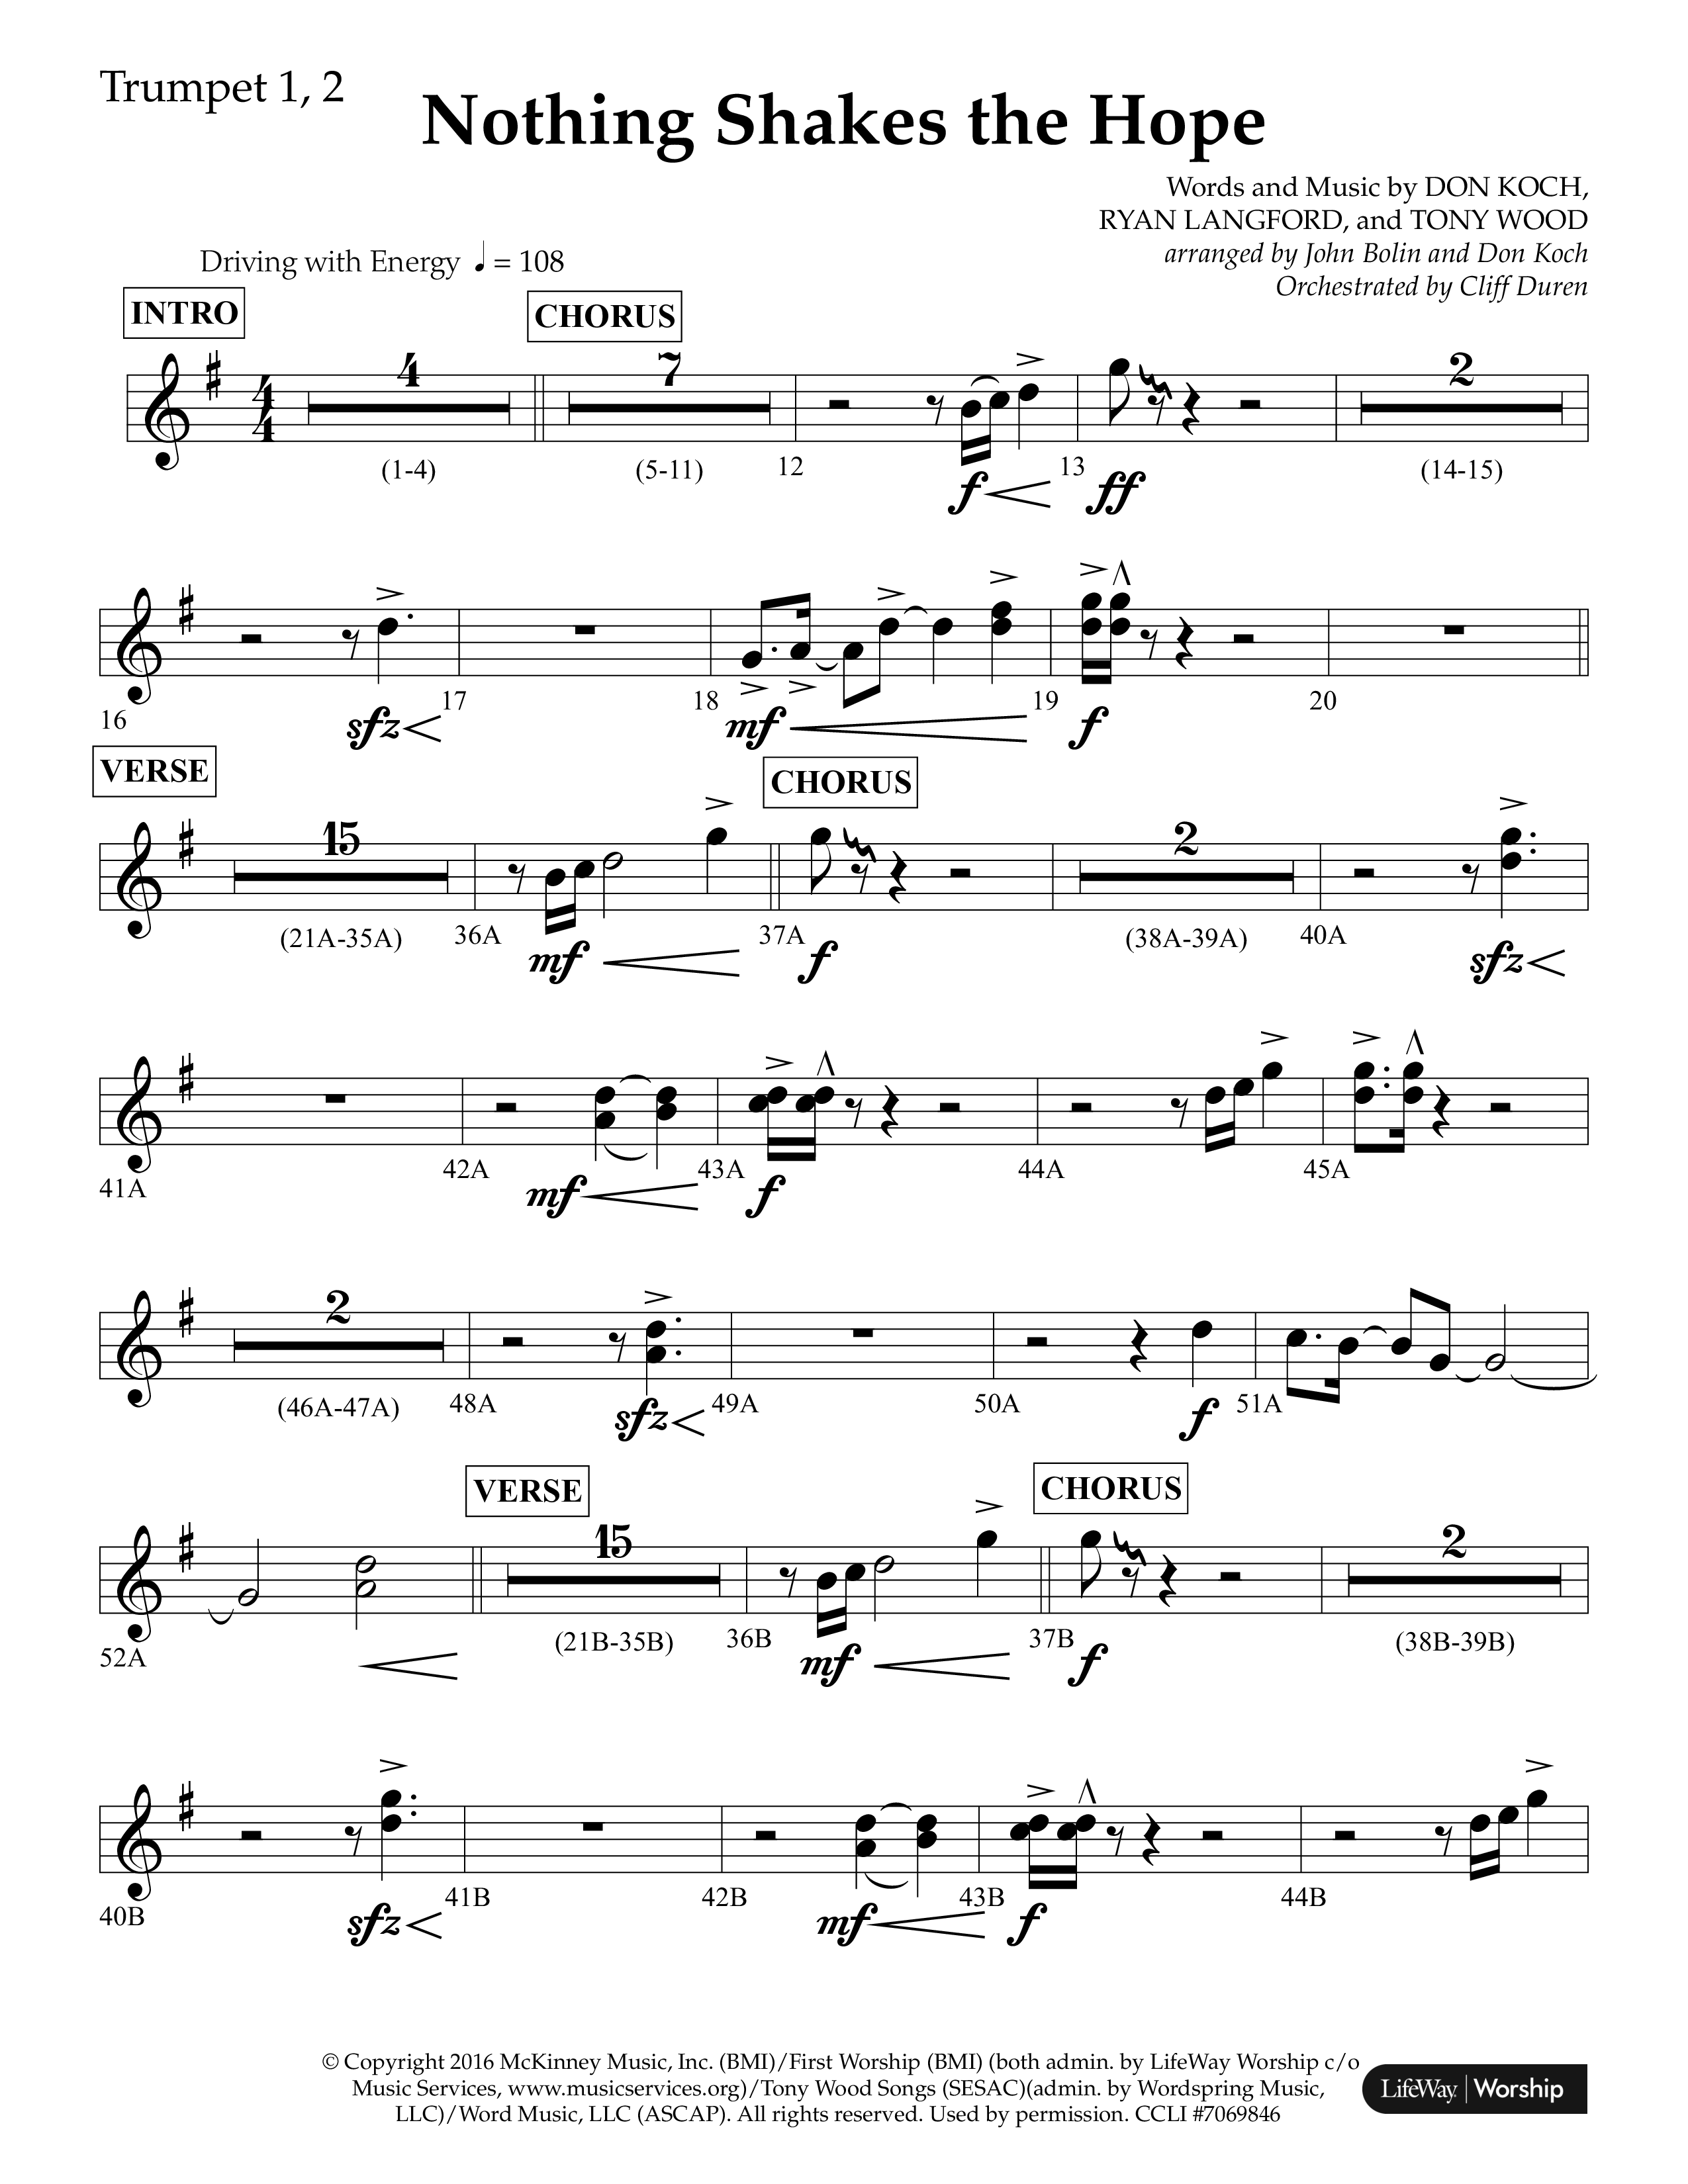 Nothing Shakes The Hope (Choral Anthem SATB) Trumpet 1,2 (Lifeway Choral / Arr. John Bolin / Arr. Don Koch / Orch. Cliff Duren)